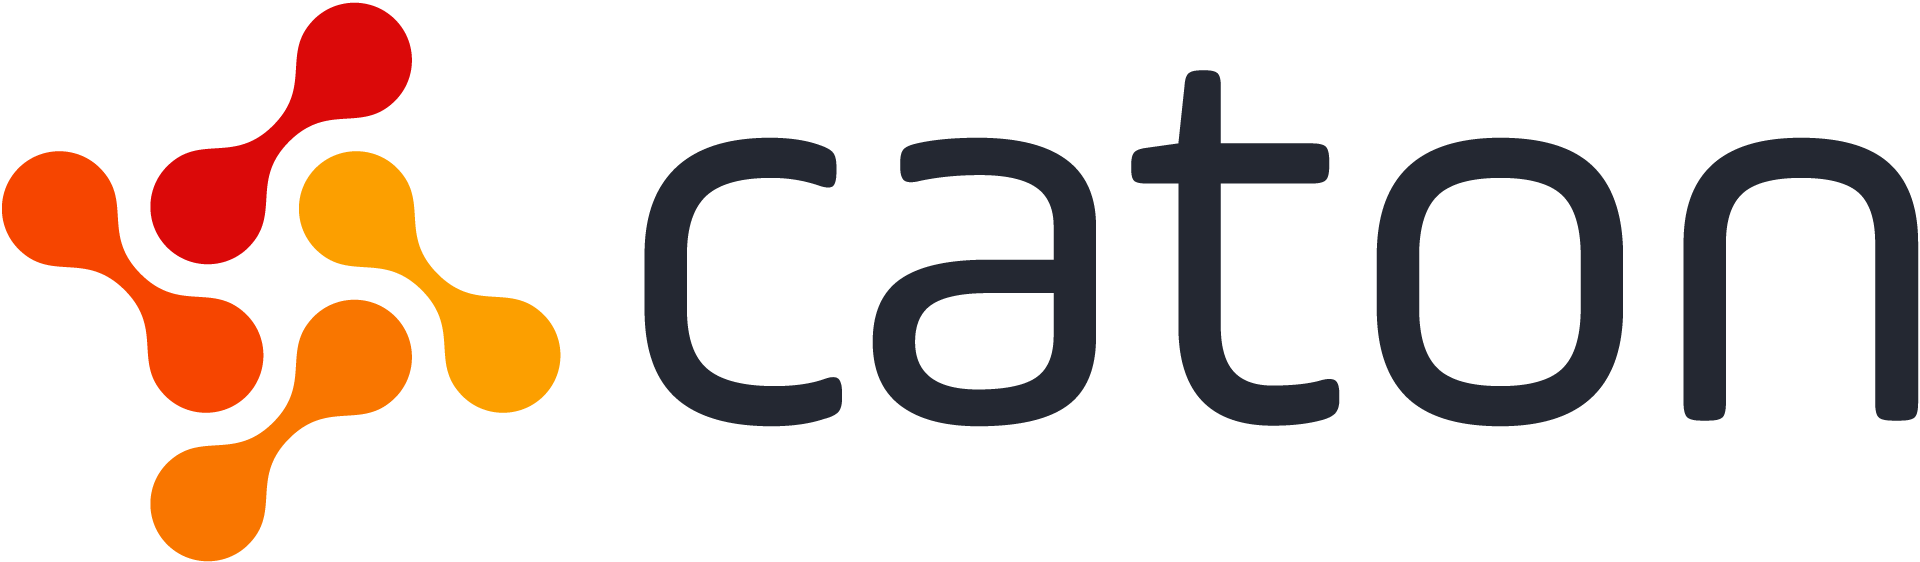 News & Insights | Caton Technology | Press Releases (2)